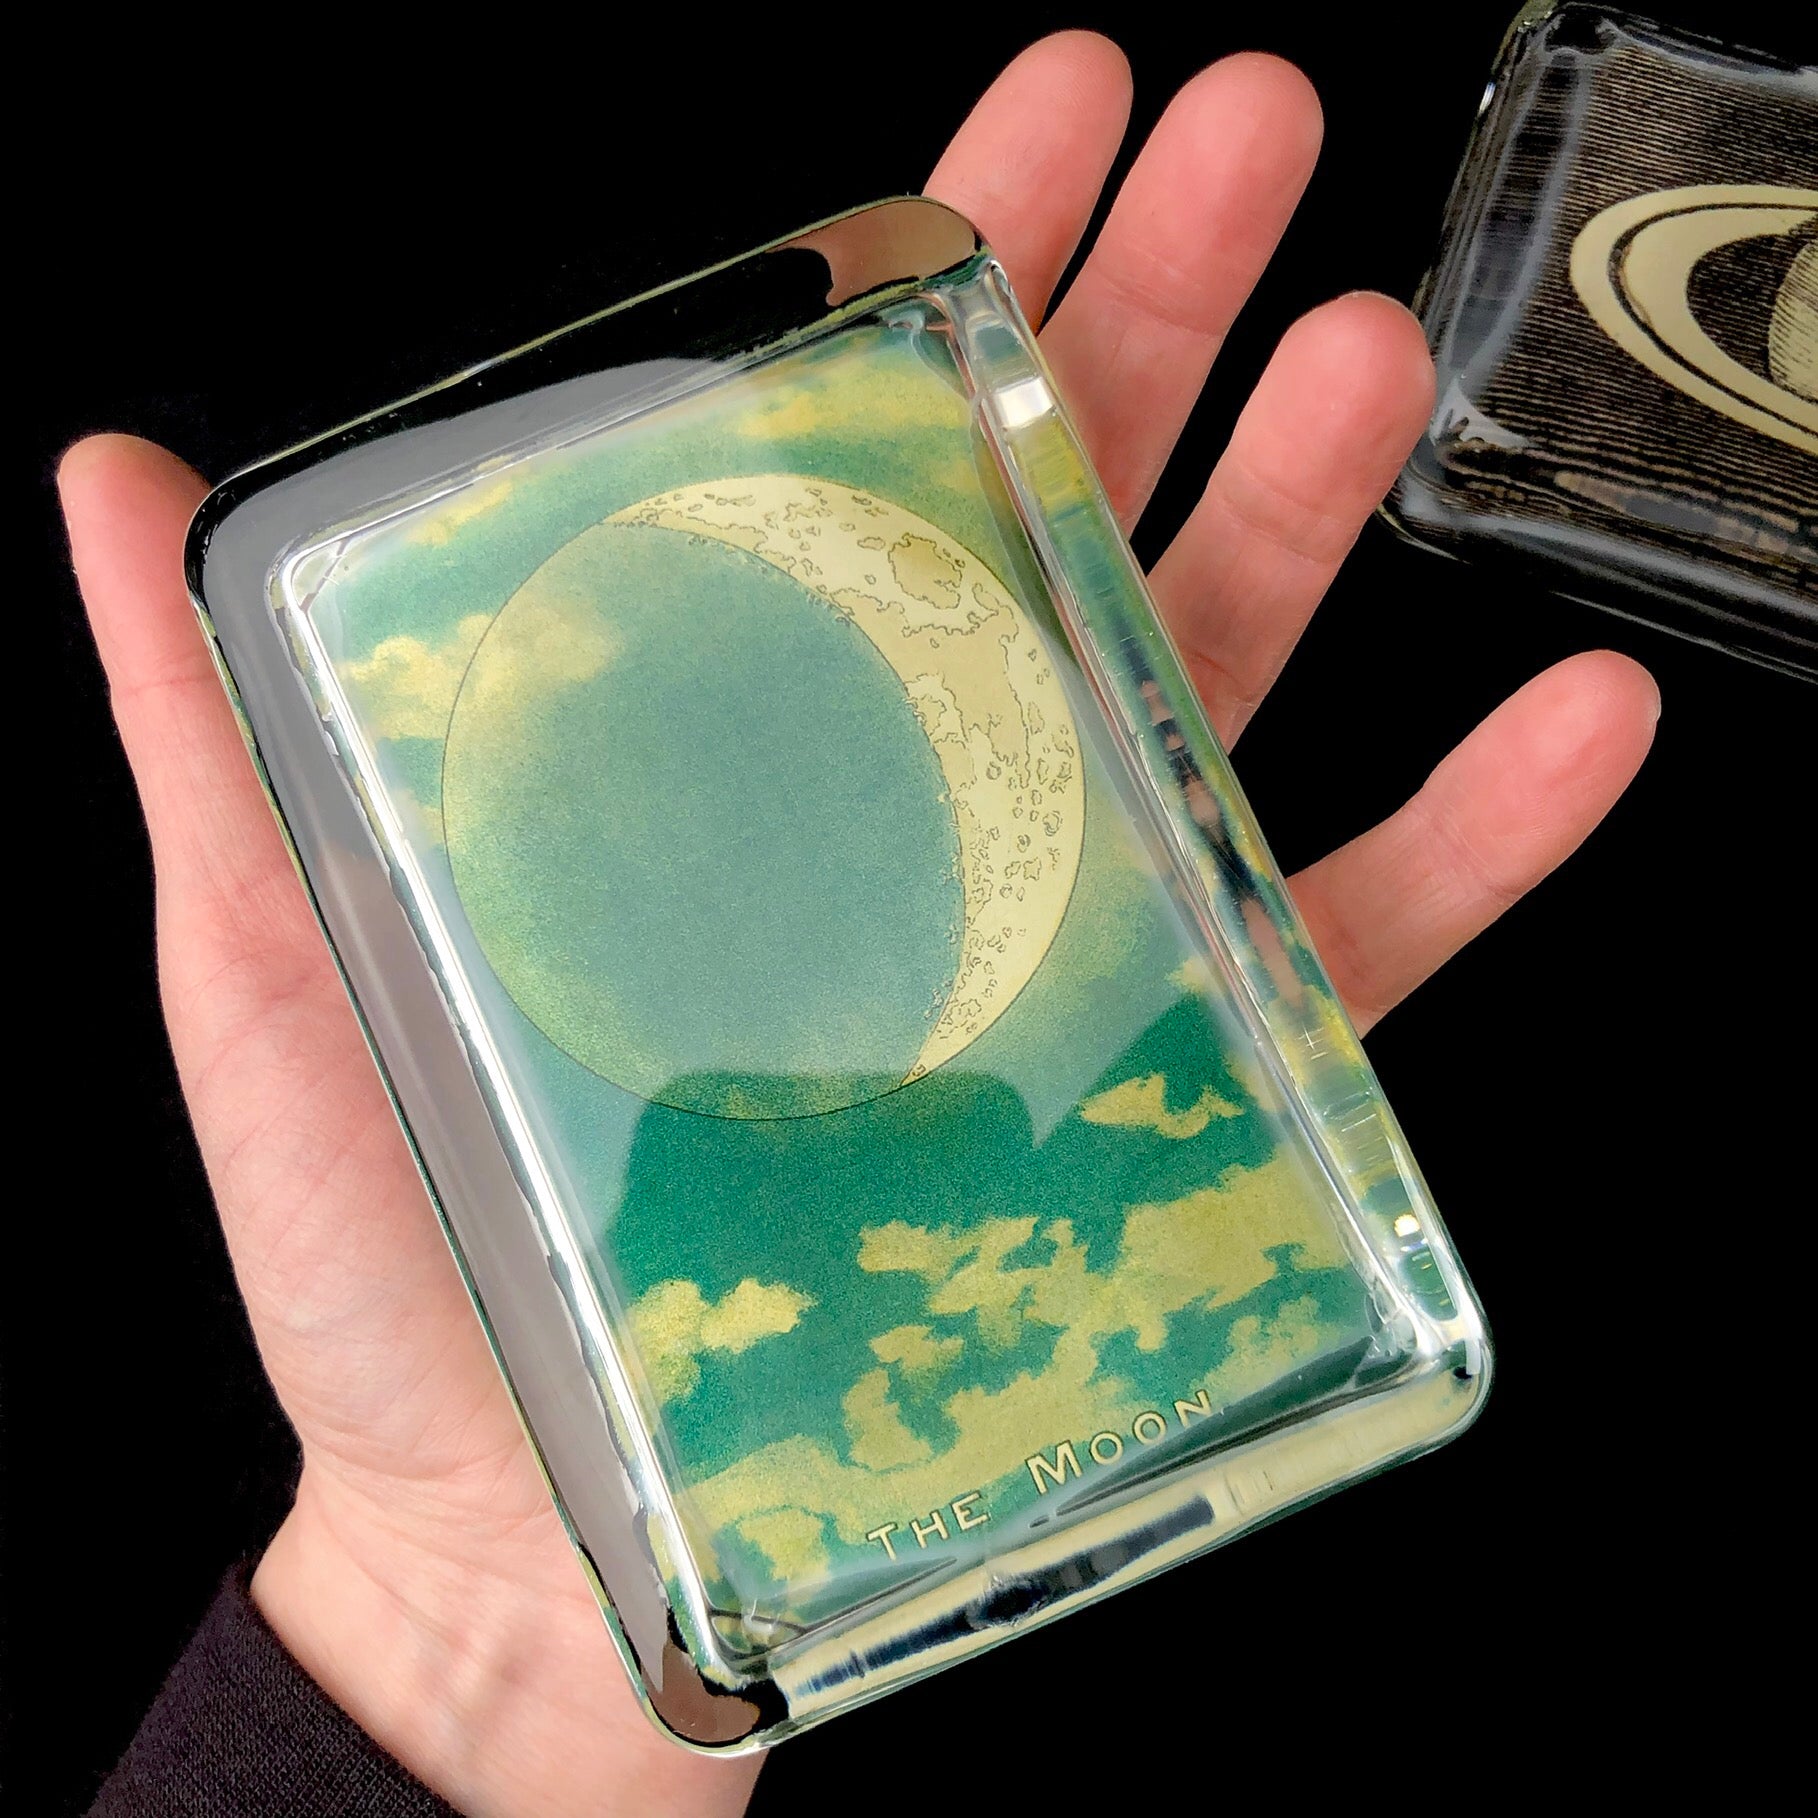 The Moon Paperweight shown in hand